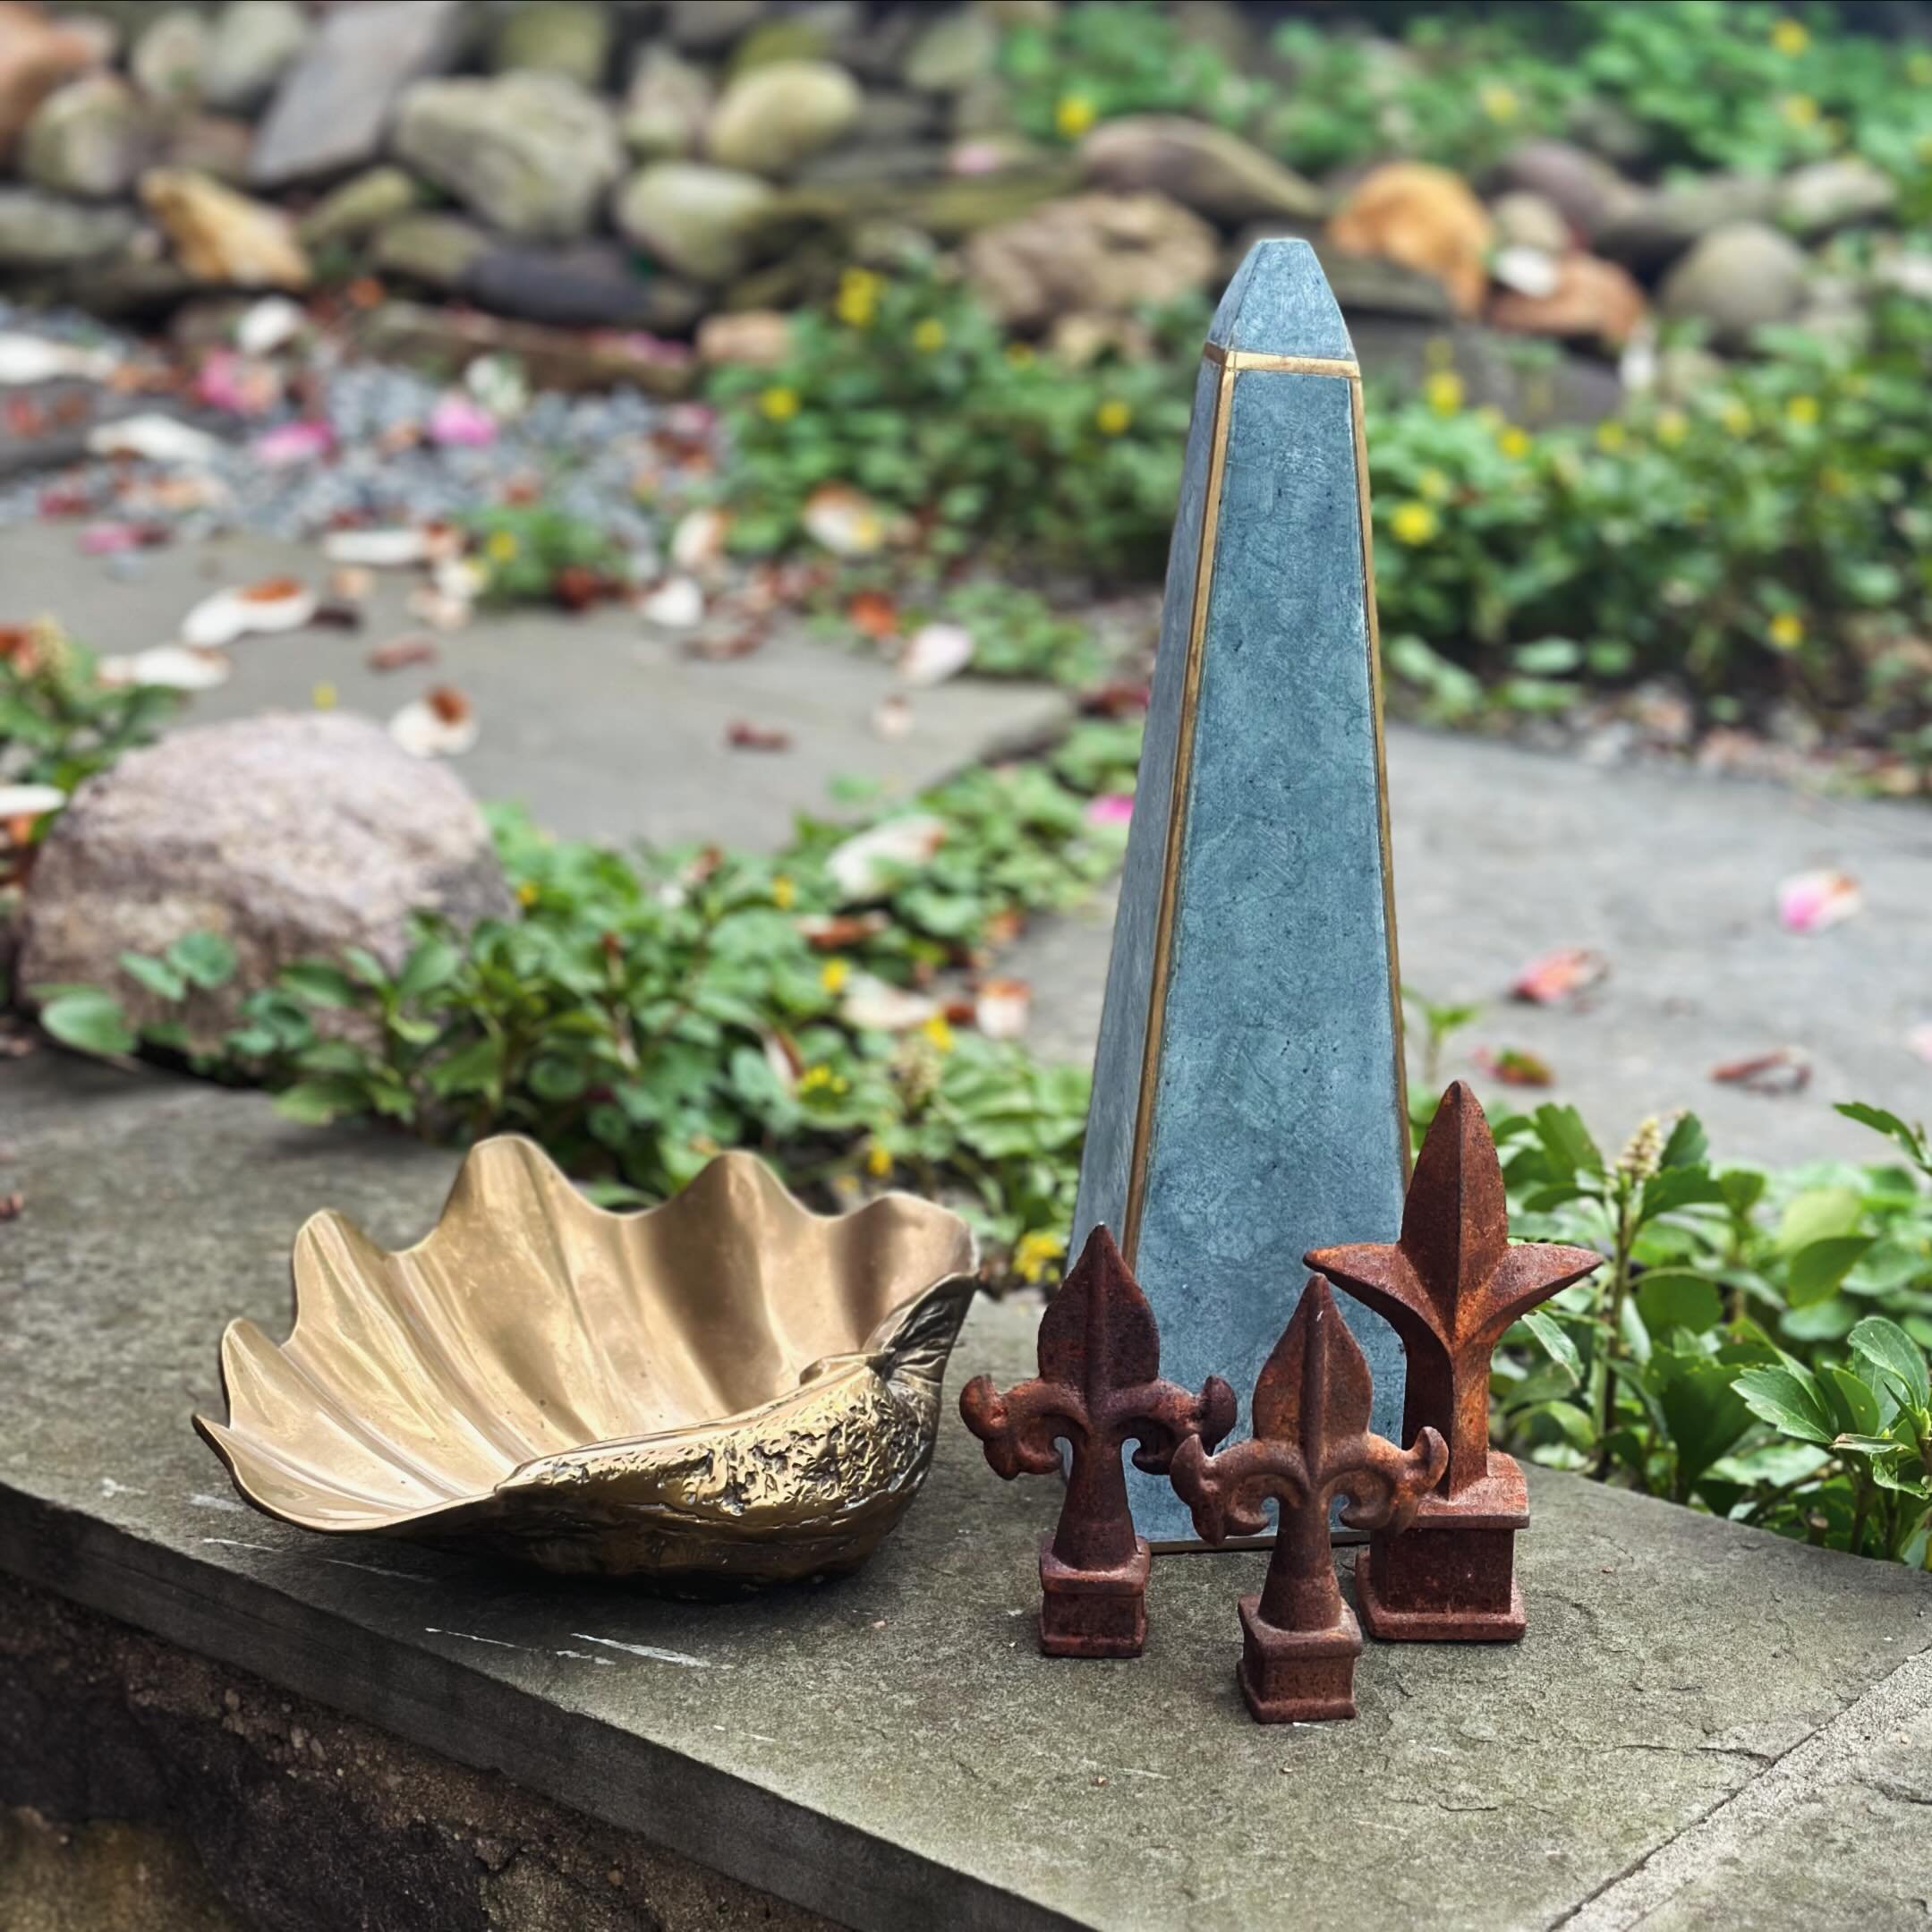 Some really good styling find  just added to the website! Link in bio - themainlinefind.com
Finials - $24
Obelisk - $68
Brass clam shell - $75